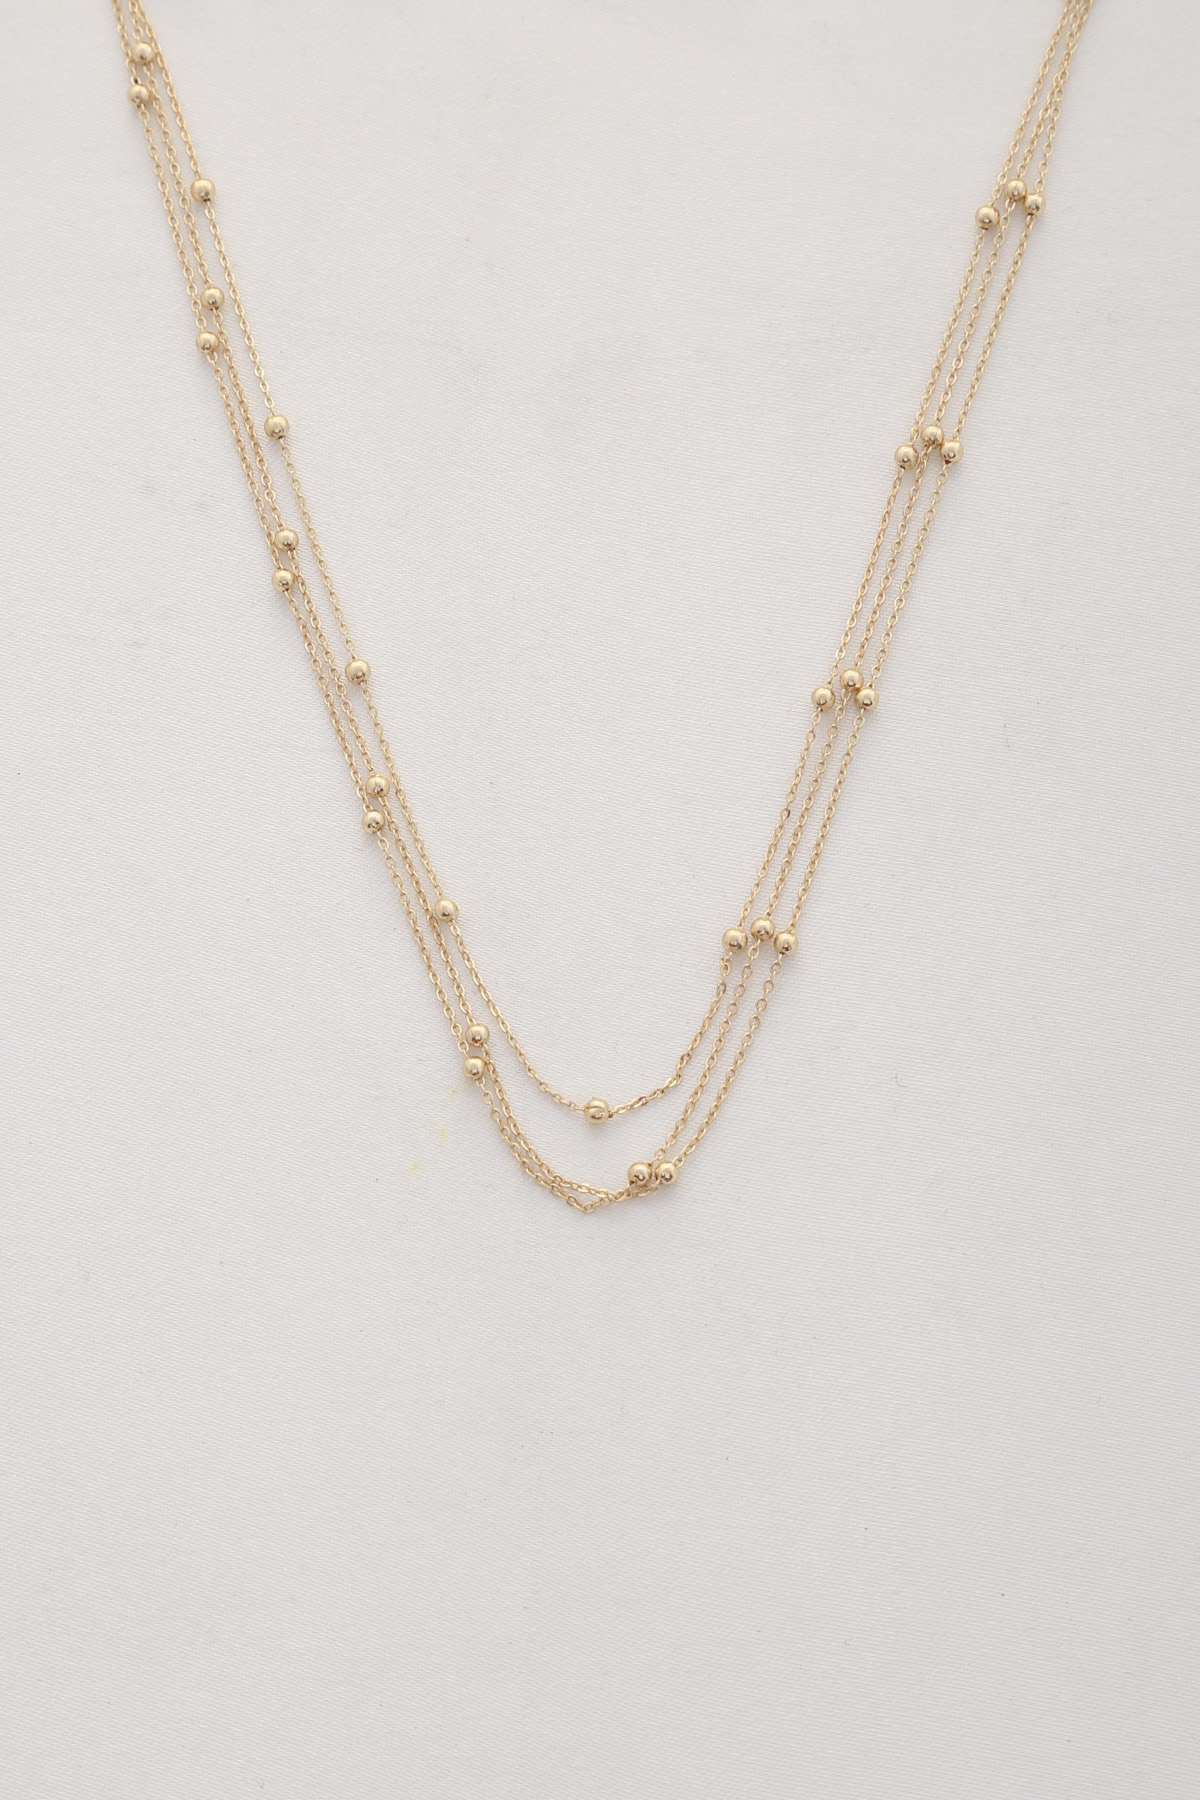 BALL BEAD CHAIN LAYERED NECKLACE